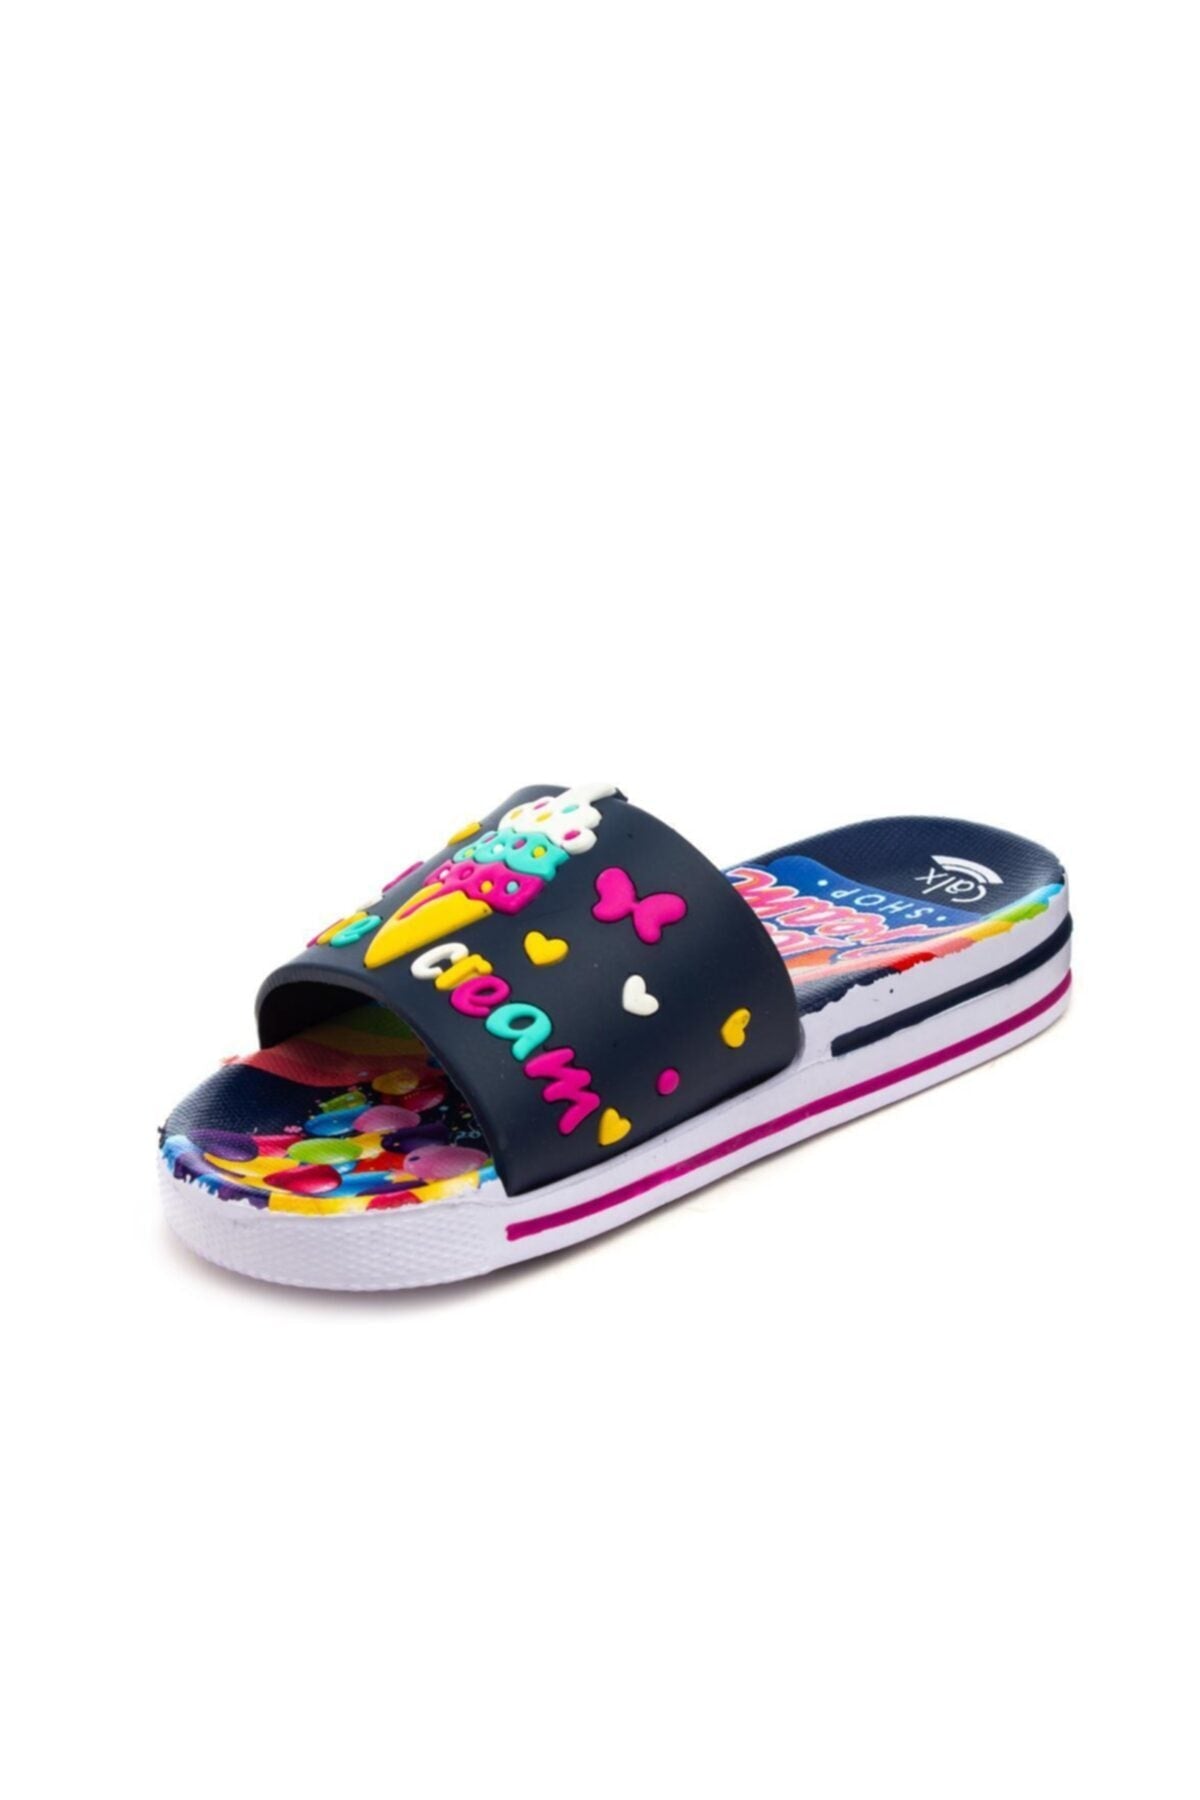 840 Girls Laiverbl Sandals Slippers